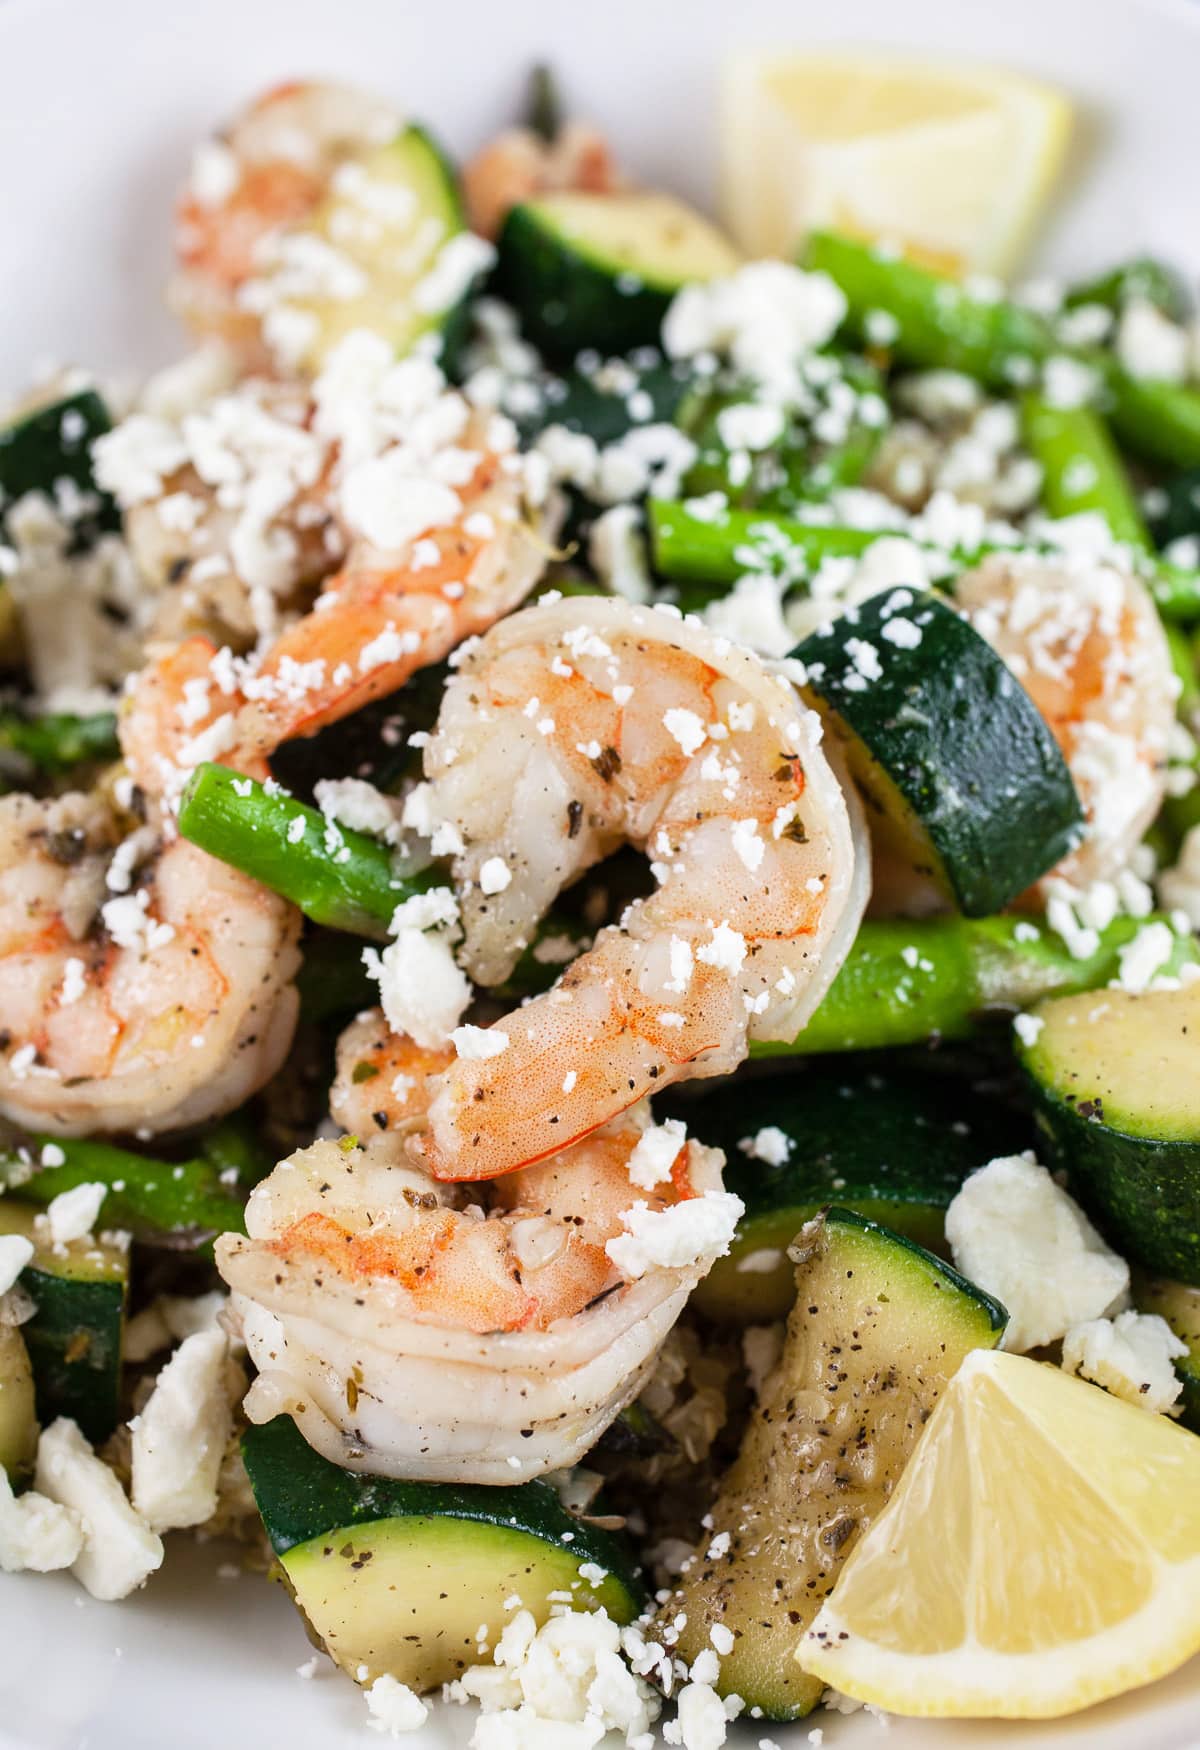 Skillet shrimp with asparagus, zucchini, feta cheese, and lemon wedges in white bowl.